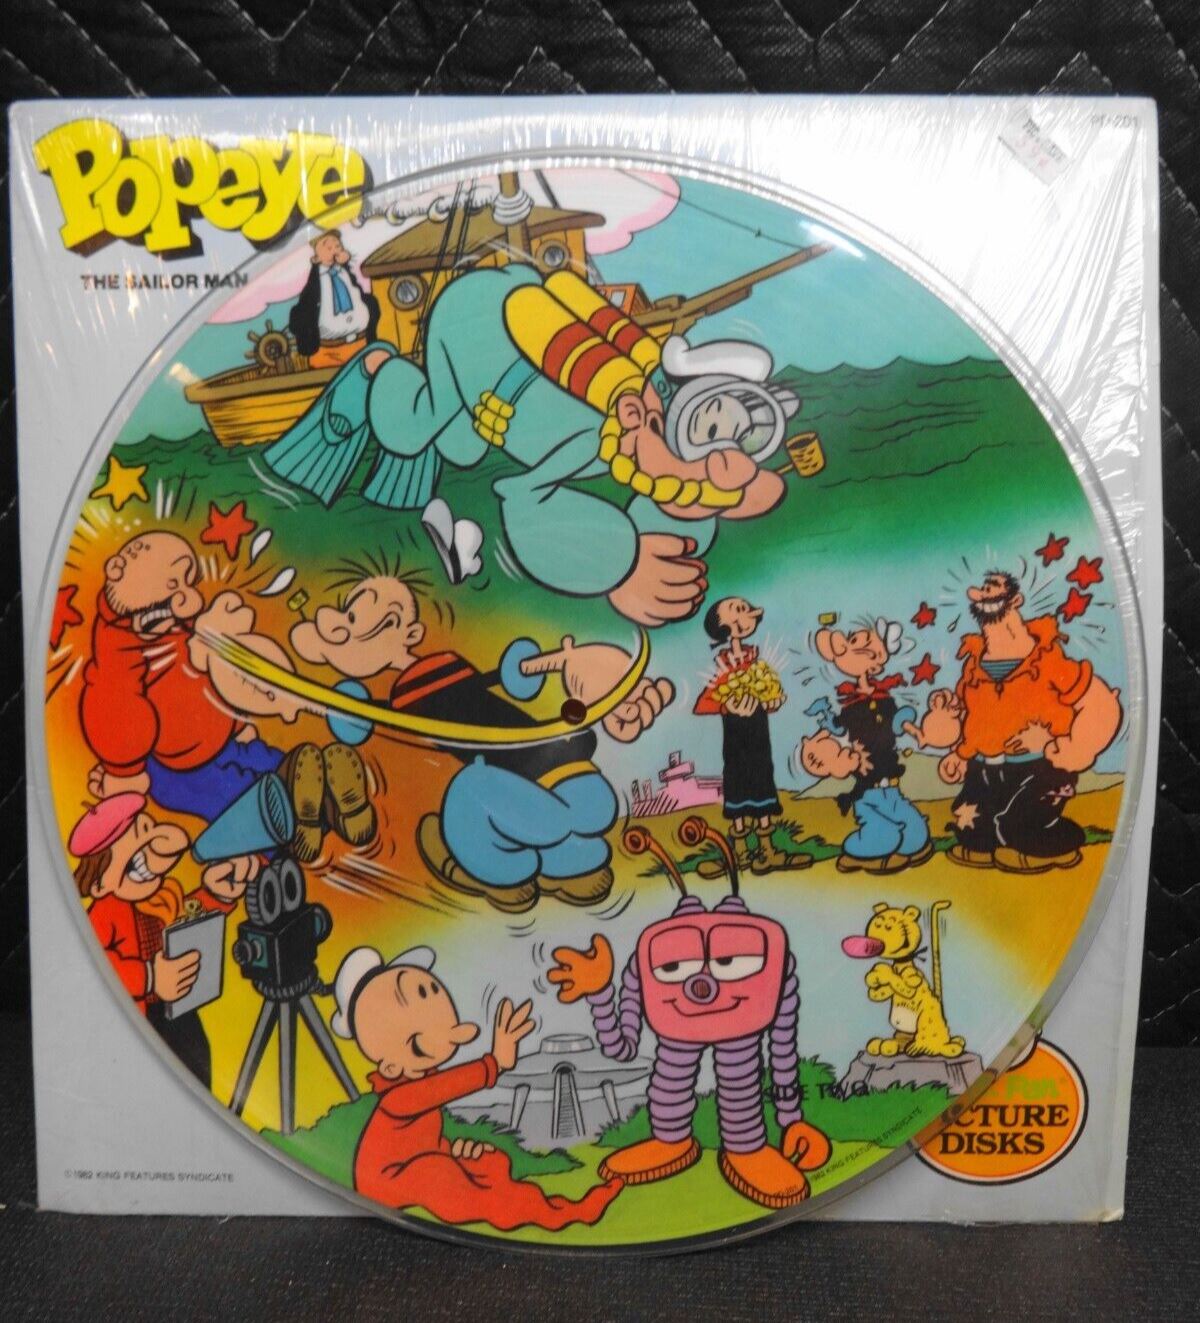 Popeye The Sailor Man Picture Disk by Peter Pan - 1982 King Features Syndicate